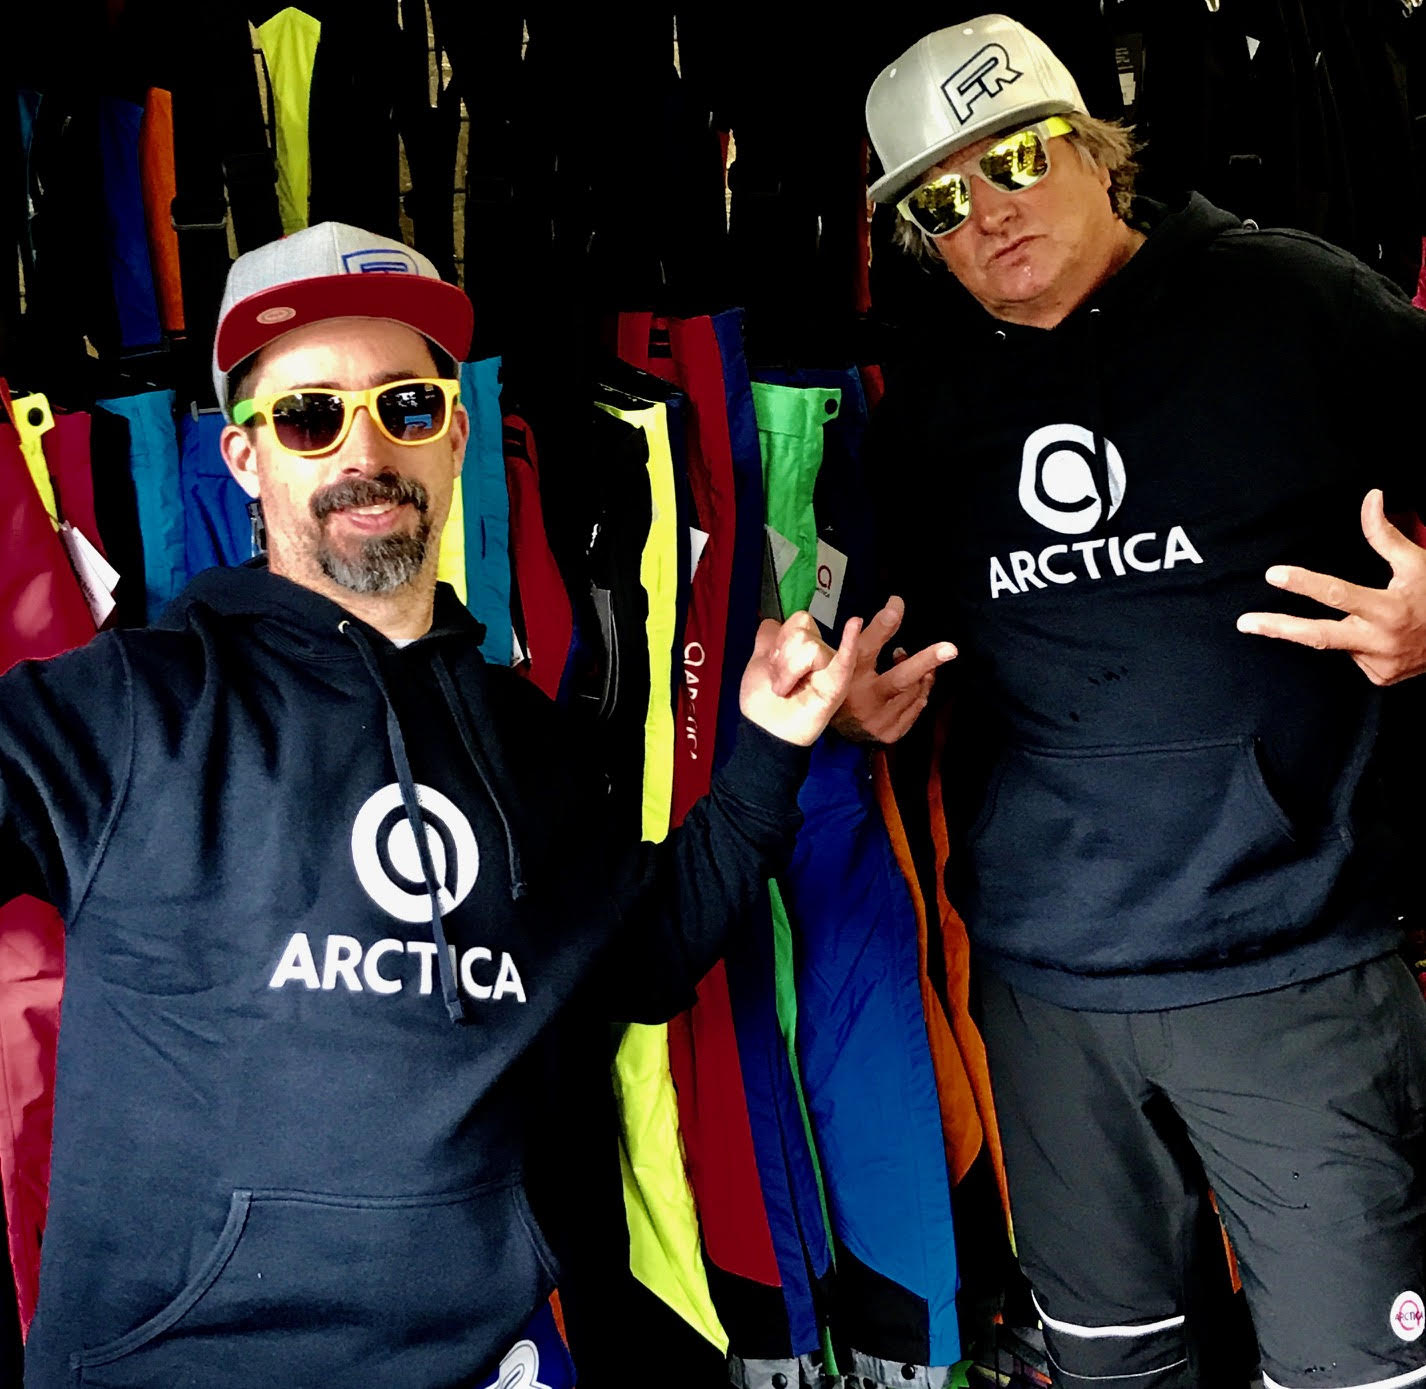 Robert and Franz of the Fuxi Flash Govi 1 Stop Shop with the Arctica pants at their Mt Hood Ski Shop